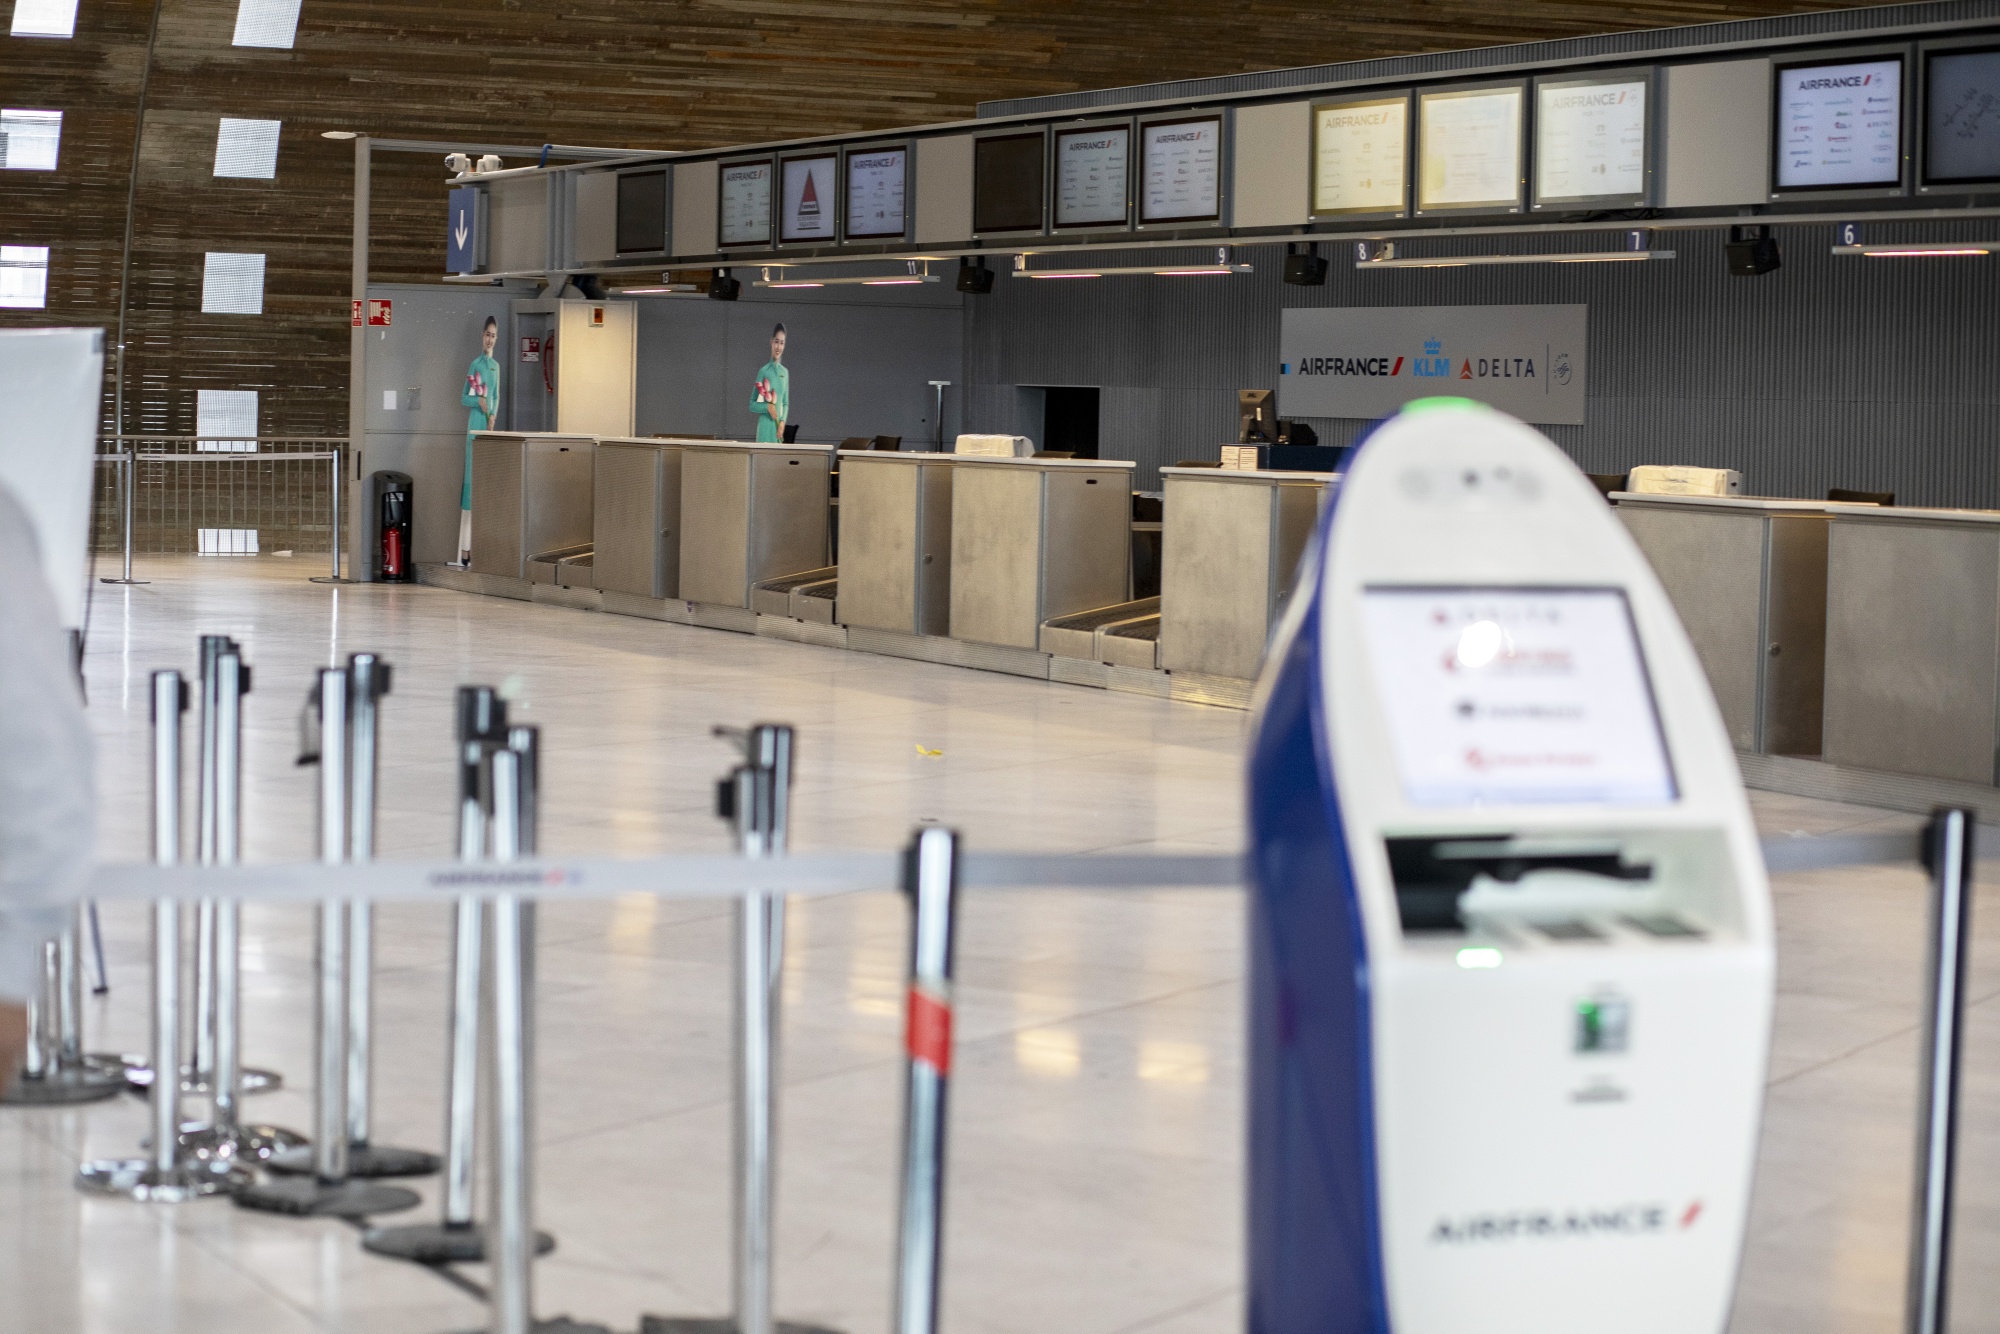 Service desks stand empty at the Air France-KLM check-in area at Charles de Gaulle Airport,&nbsp;in Roissy, France, on&nbsp;March 16.